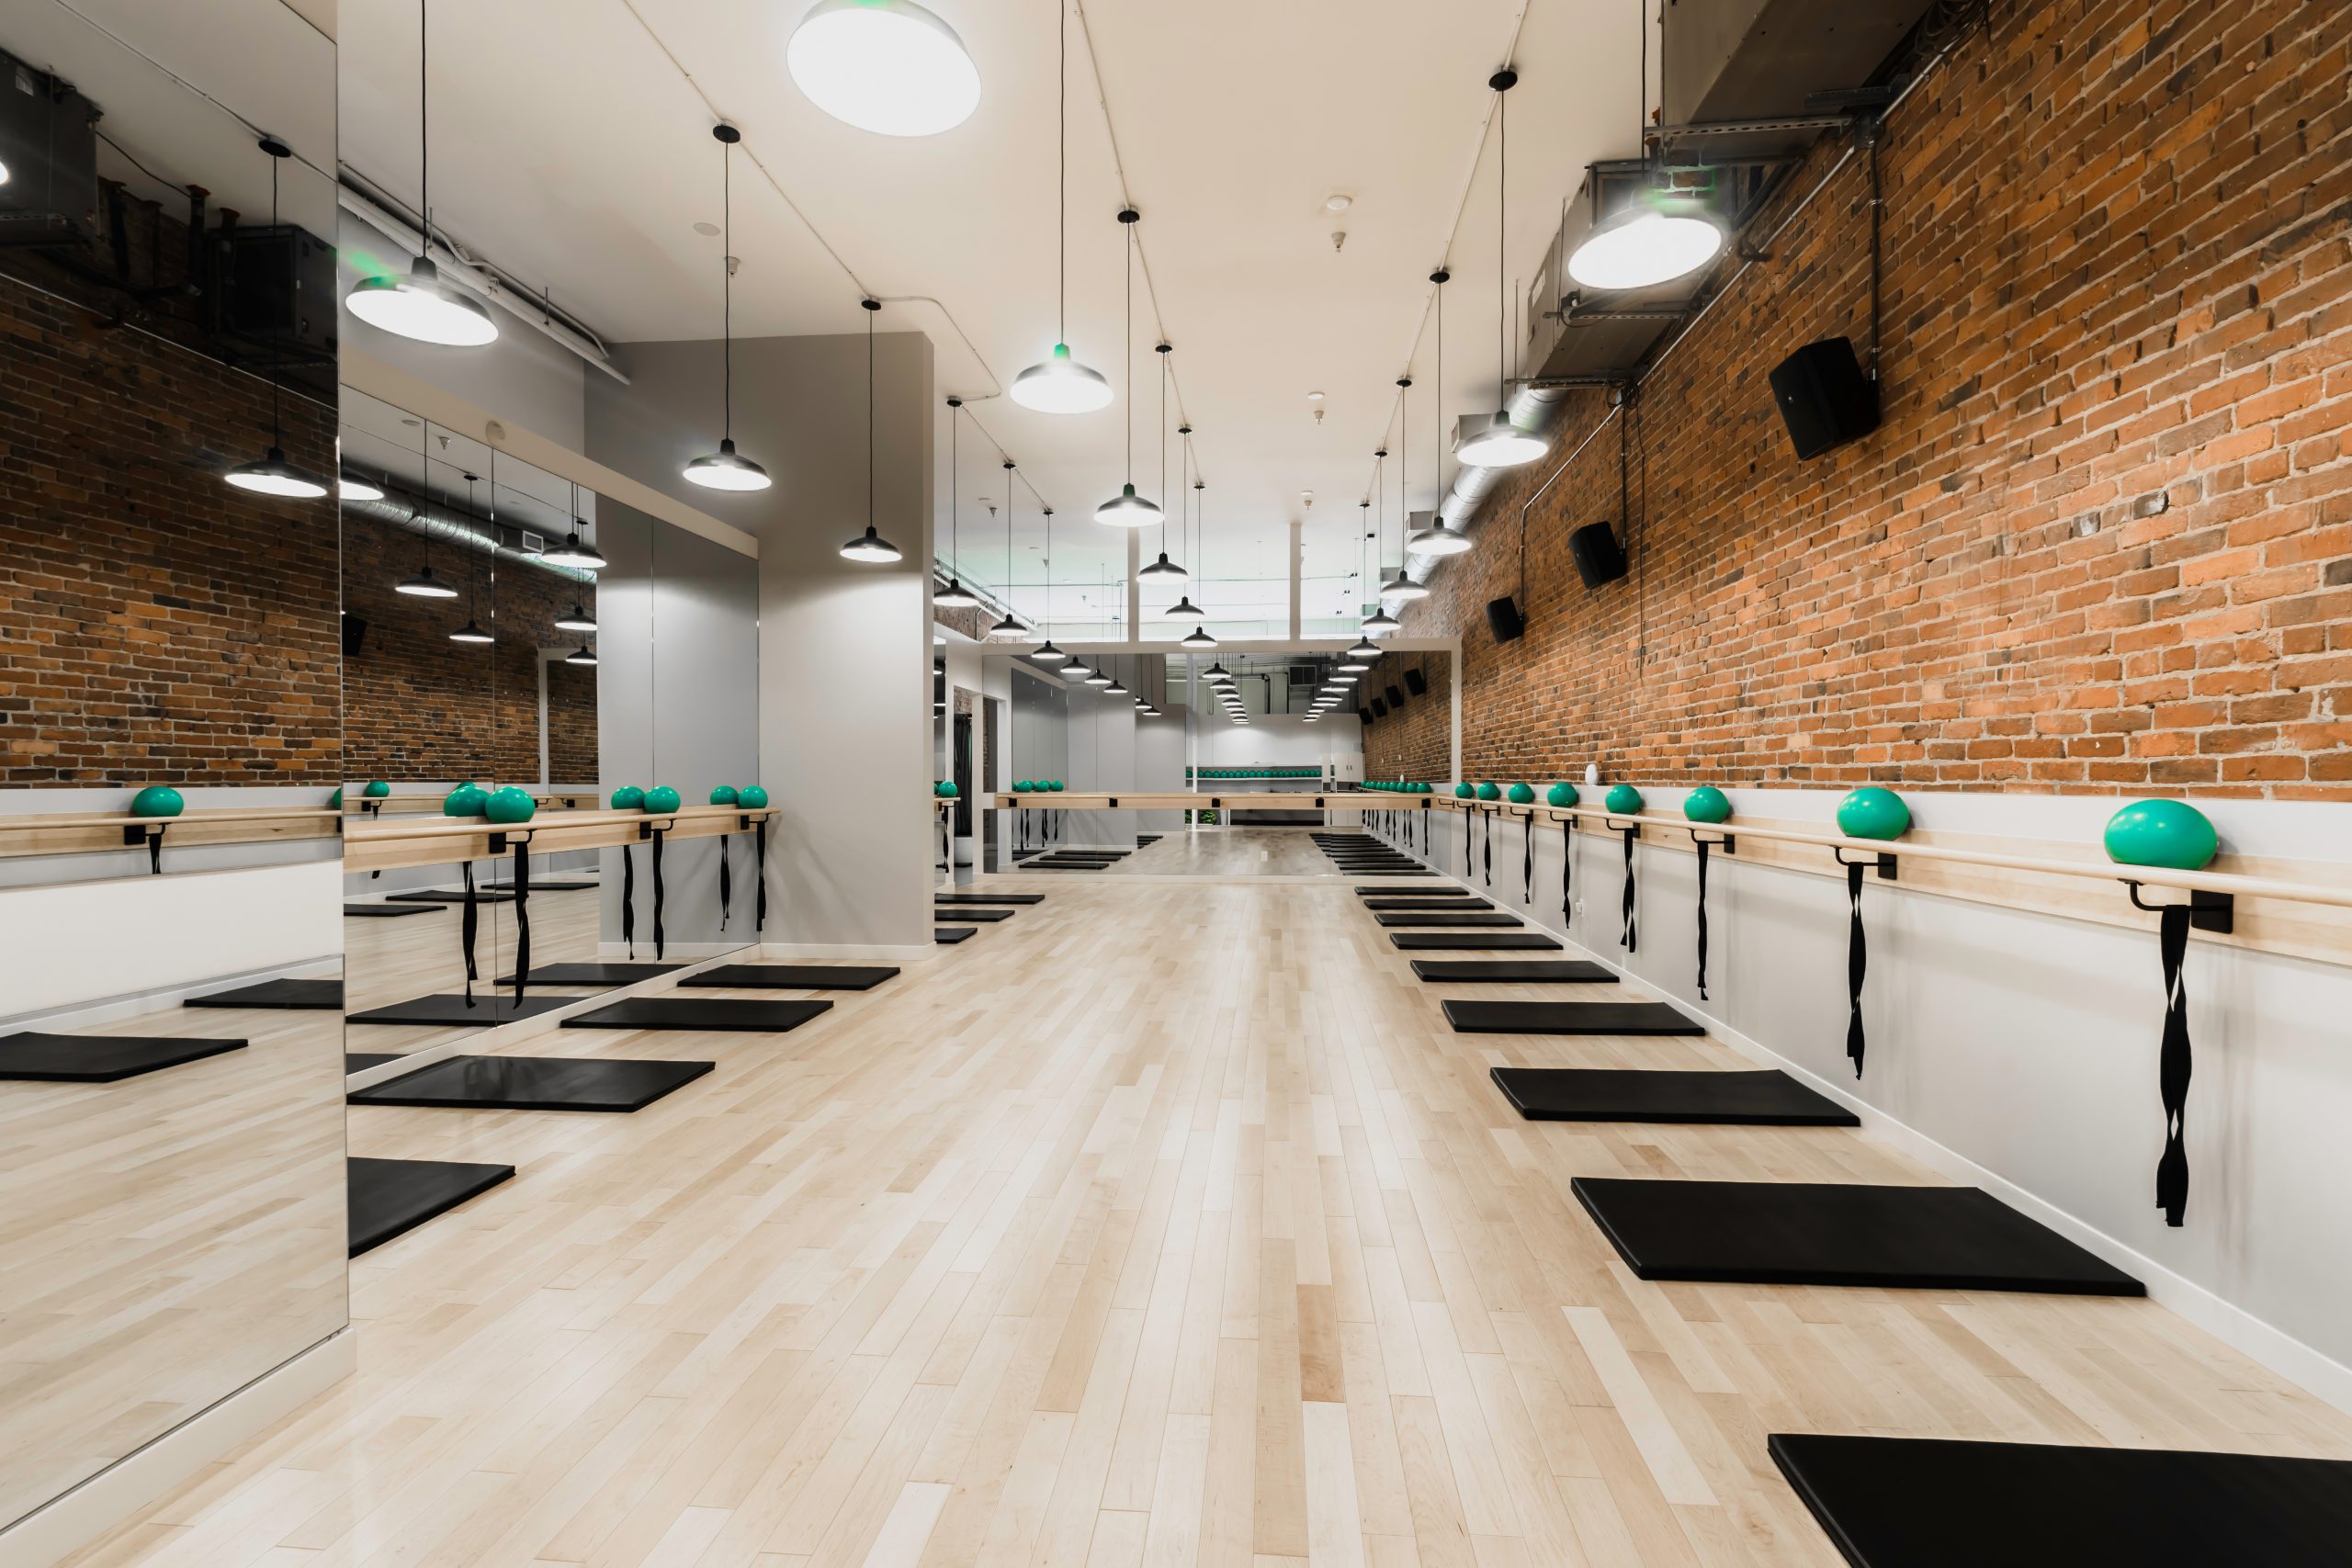 Barre Fitness interior space design in Surrey BC by Cutler